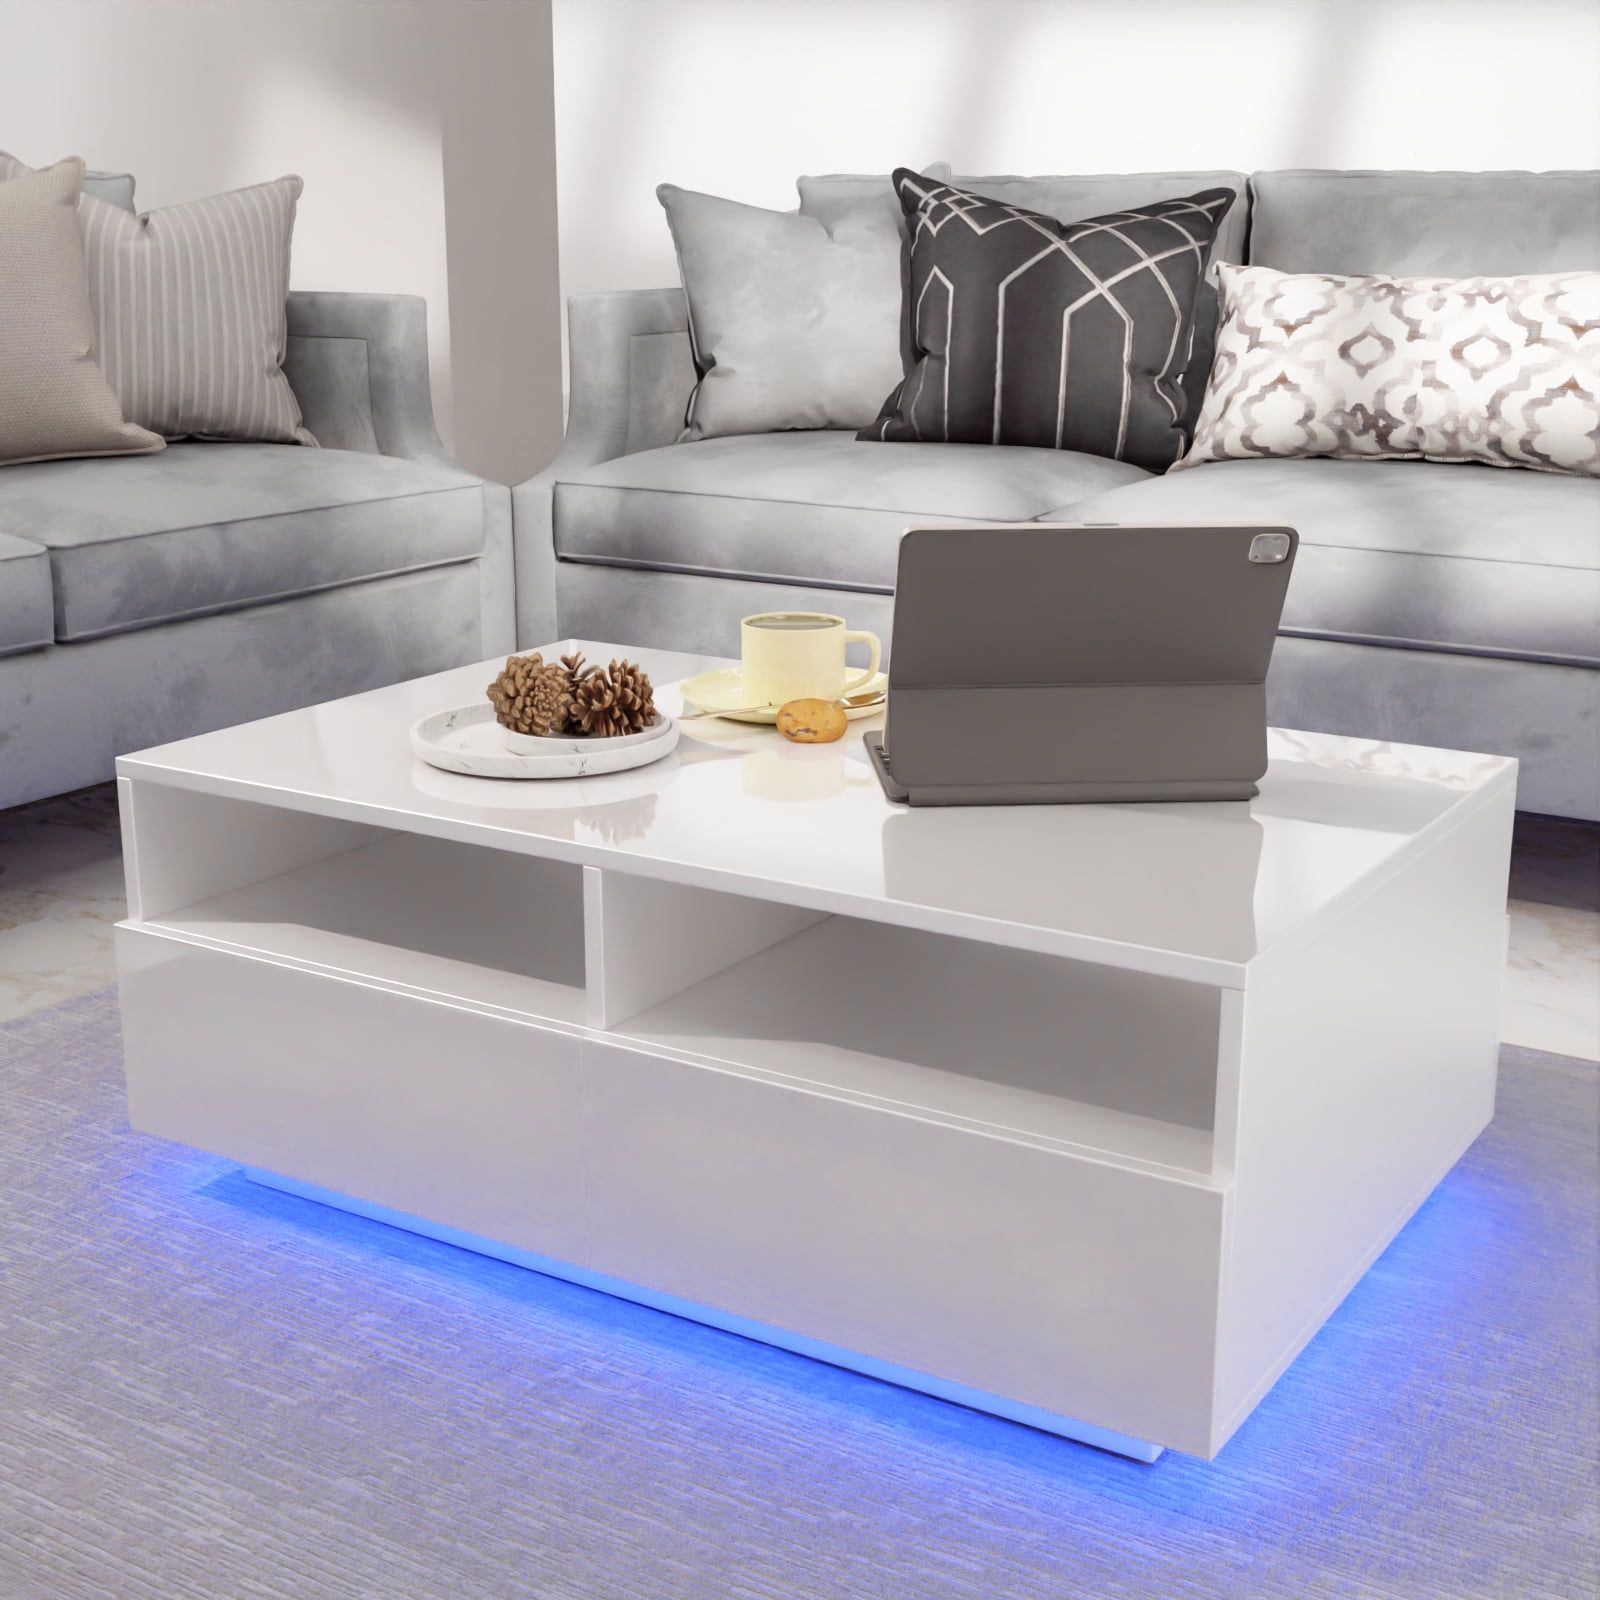 High Gloss Led Coffee Table Modern Center Tea Table With Adjustable Led  Light And Storage 35.4 X 21.7 X 13.8 Inches – Walmart In Coffee Tables With Led Lights (Photo 11 of 15)